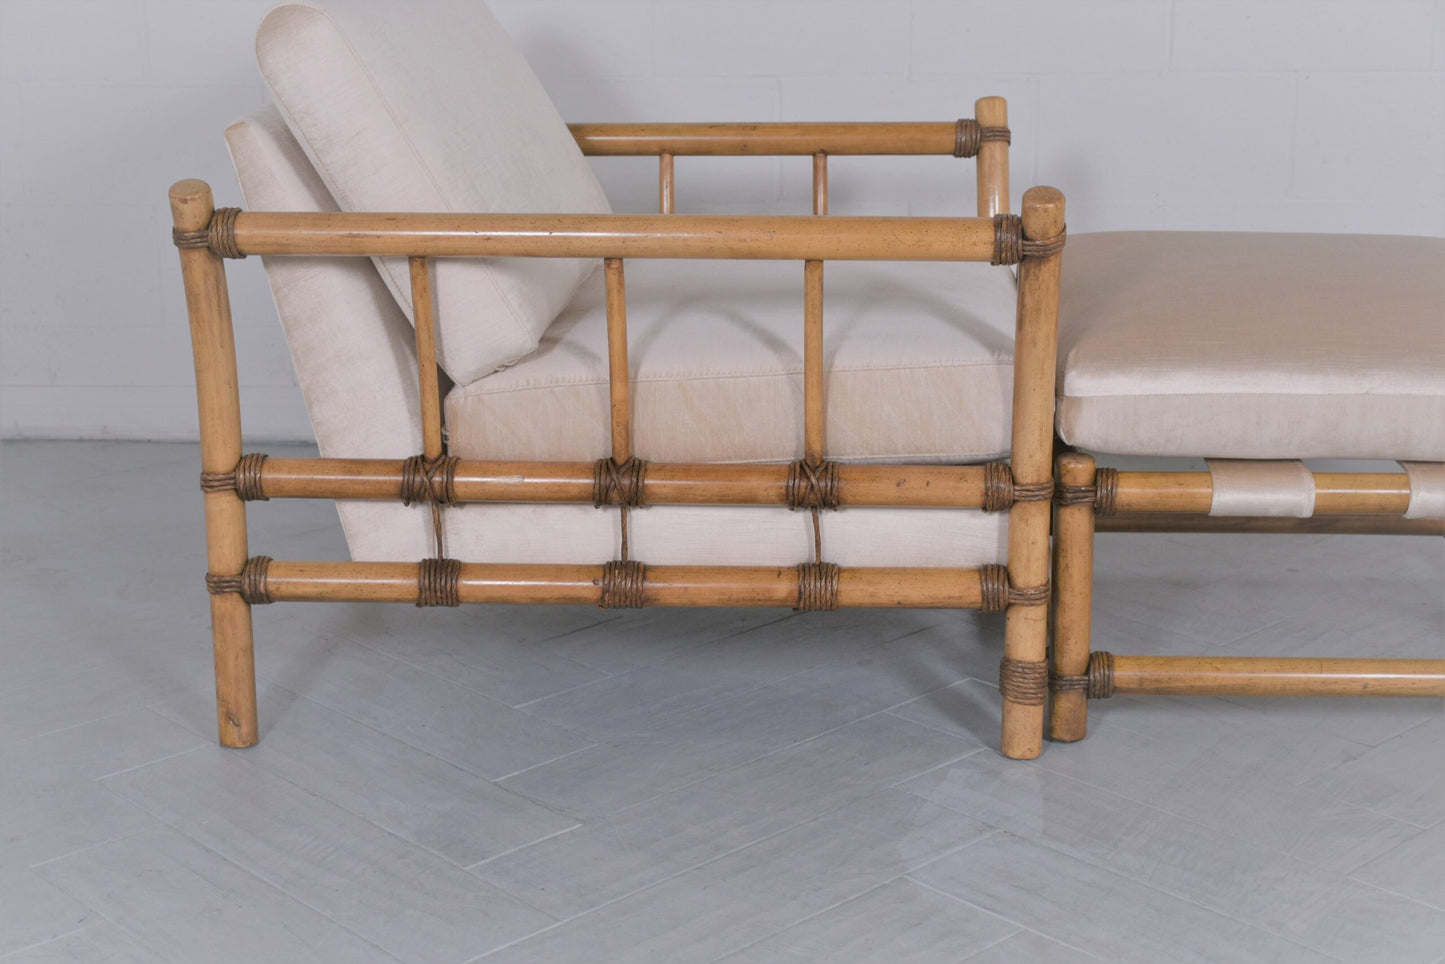 Bamboo Style Lounge Chair